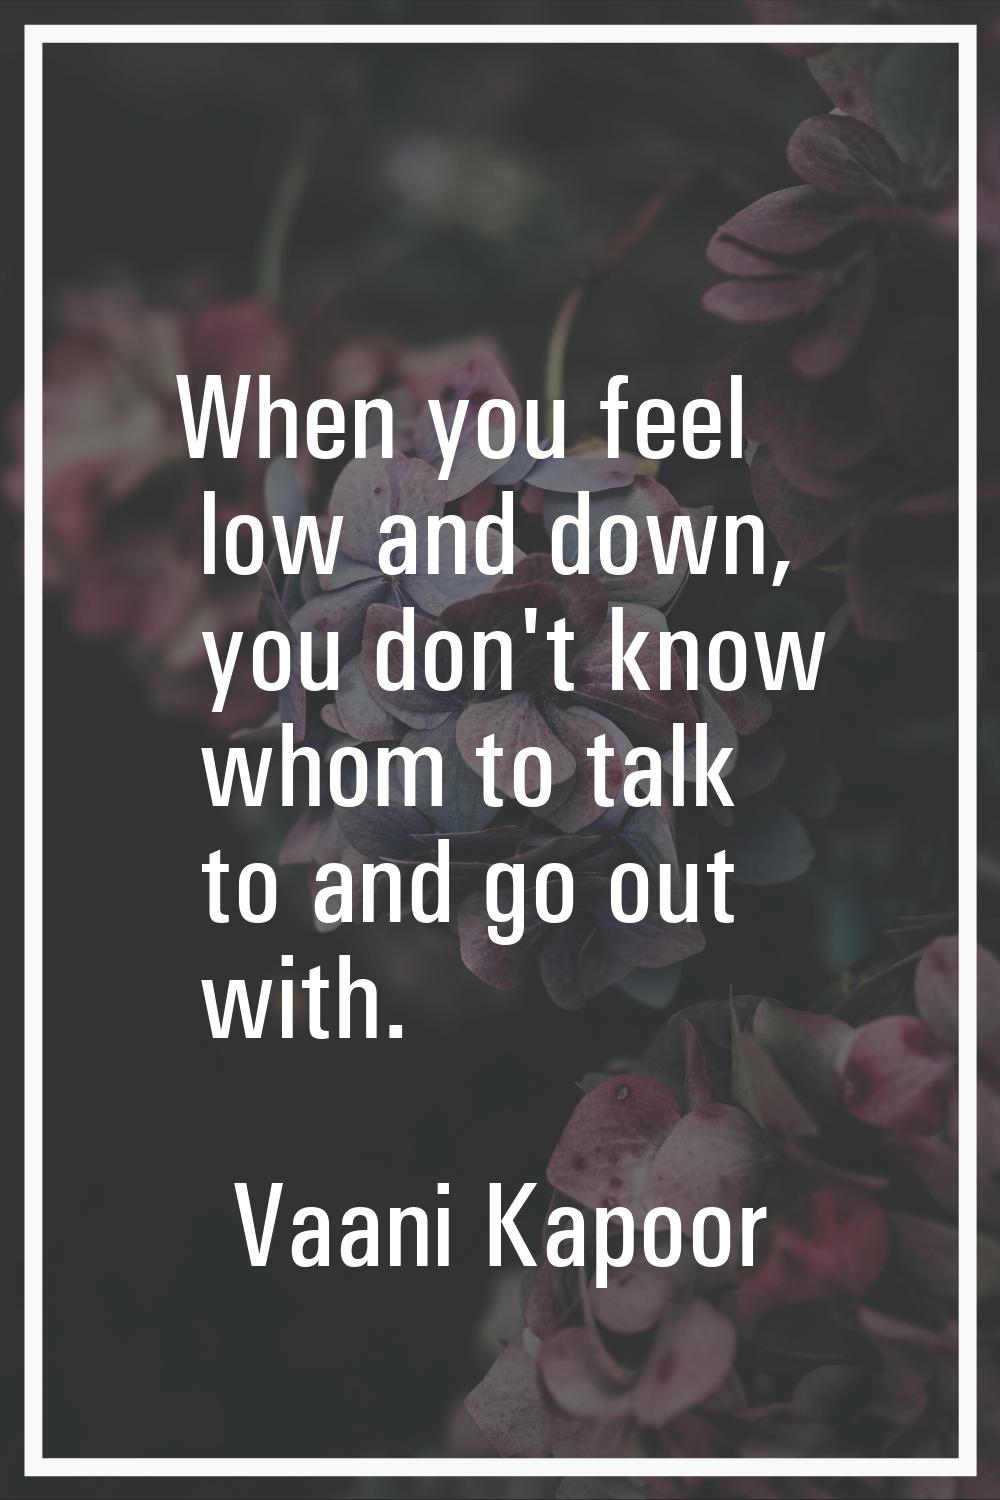 When you feel low and down, you don't know whom to talk to and go out with.